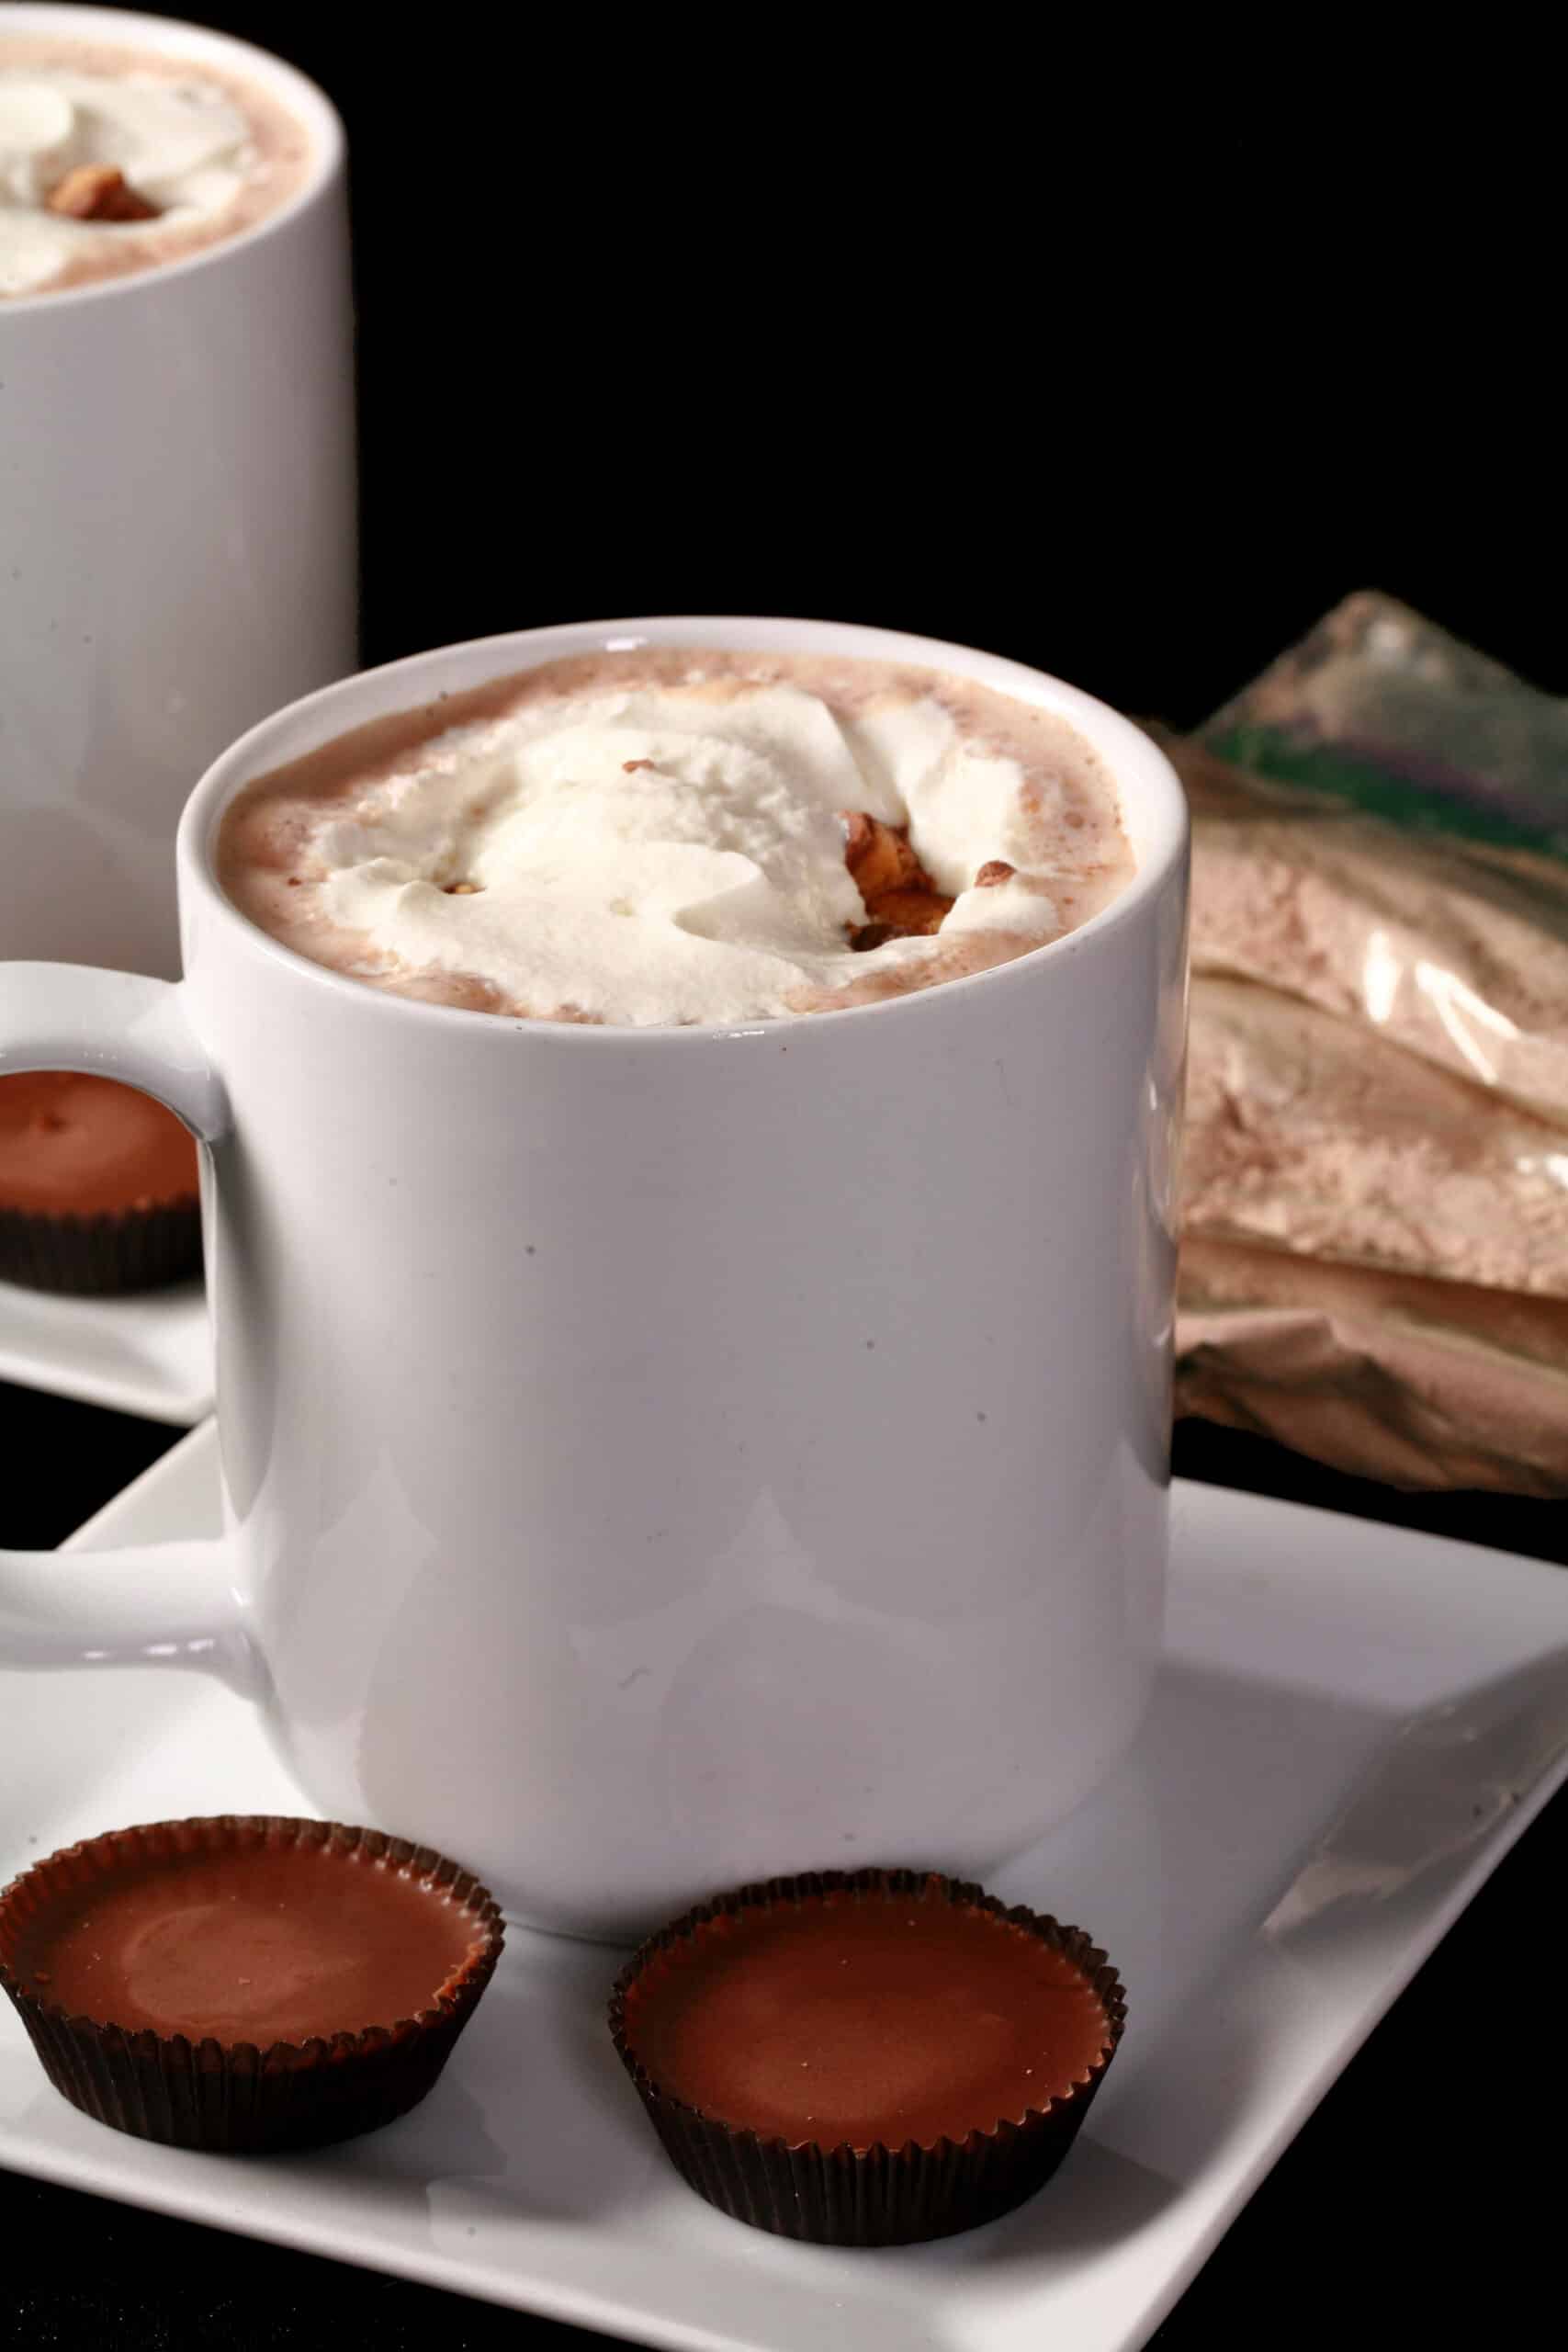 2 mugs of protein peanut butter hot chocolate with whipped cream and chopped peanut butter cups. Several packets of hot chocolate mix are in the background.